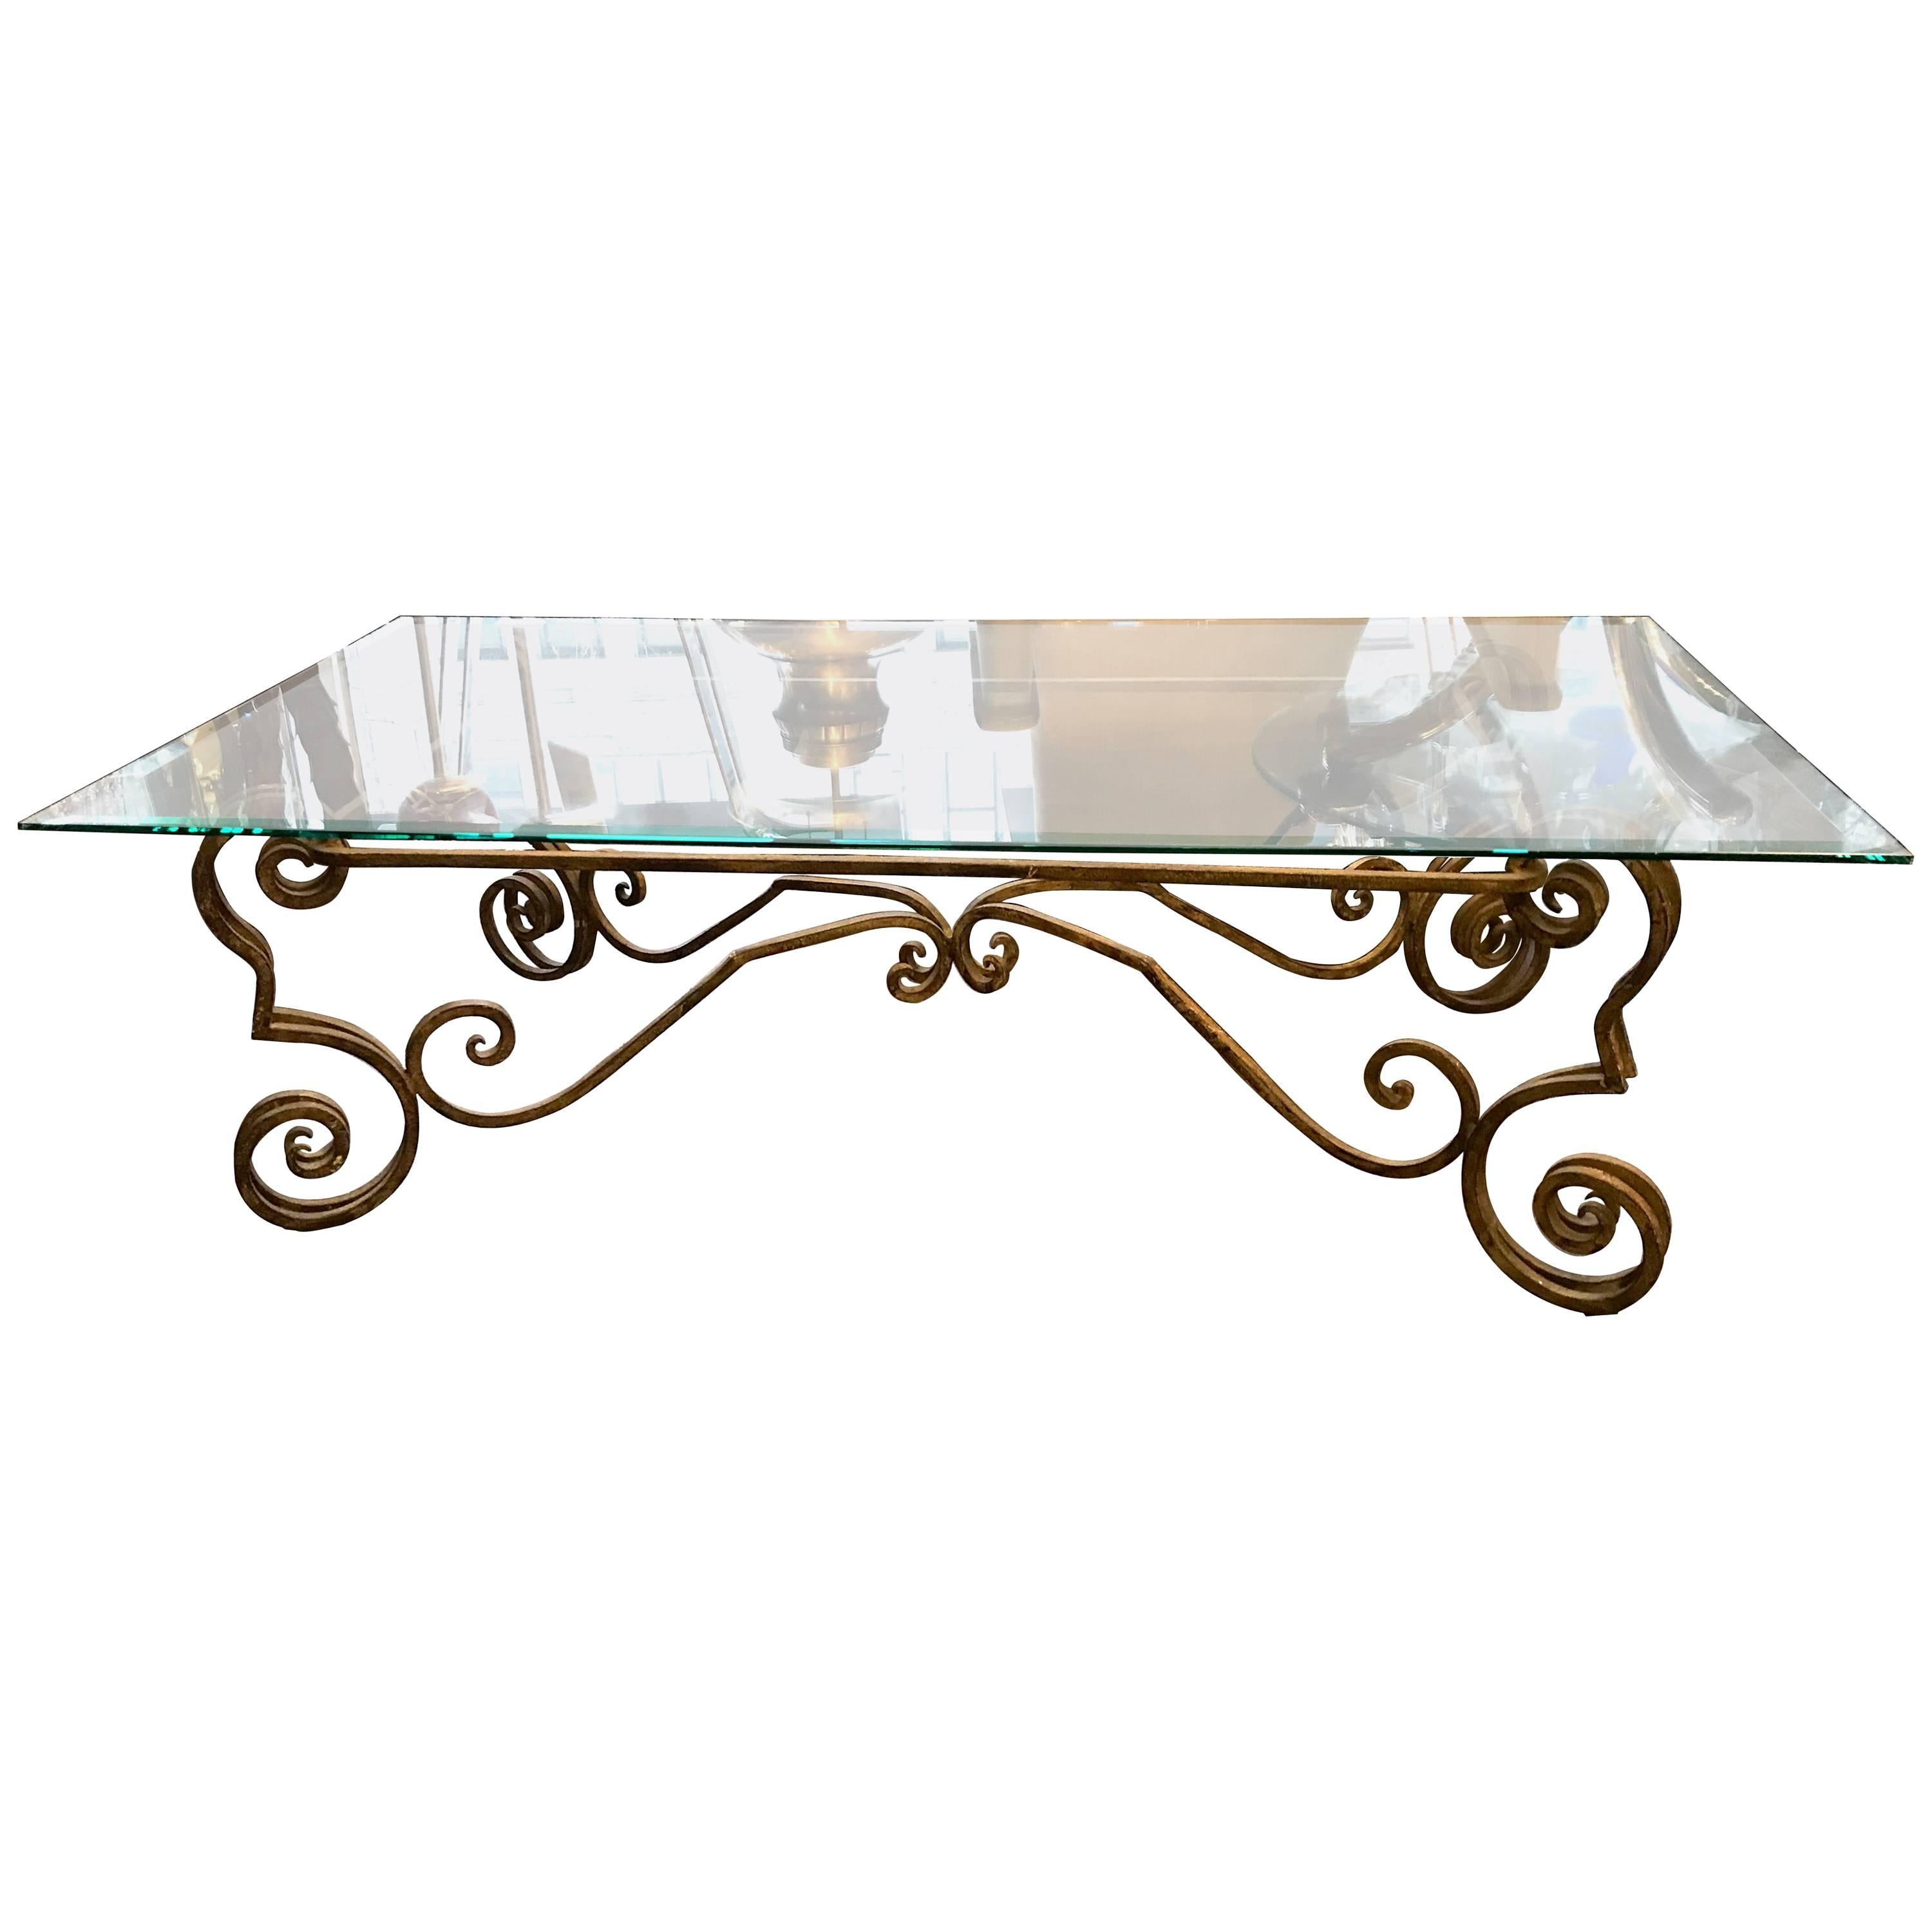 Vintage French Wrought Iron Coffee Table